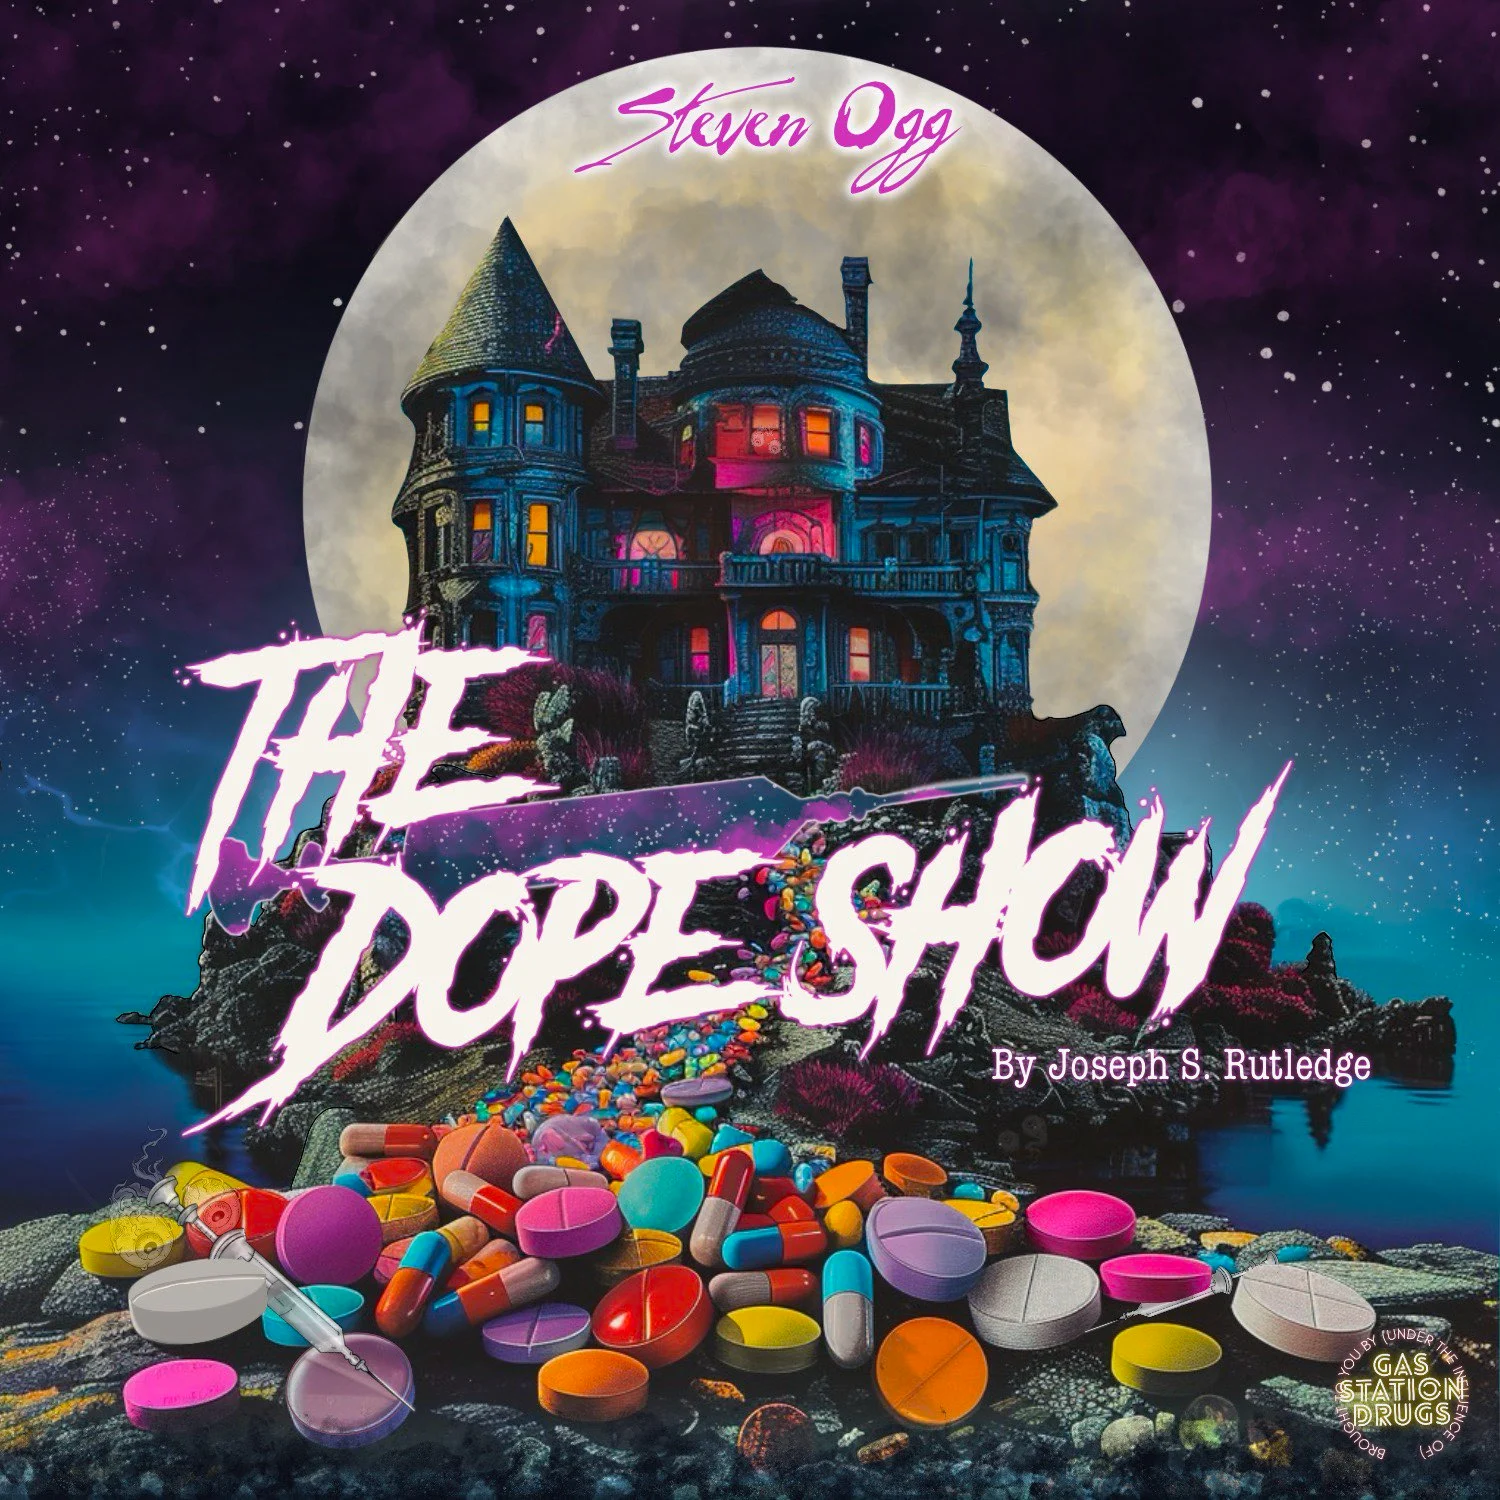 The showcard for The Dope Show. A house tangled in a veiny mess of multicolored strands sits on the edge of a needle in the center of the composition. The show's title 'The Dope Show' appears just over the barrel of the syringe in the middle-right.